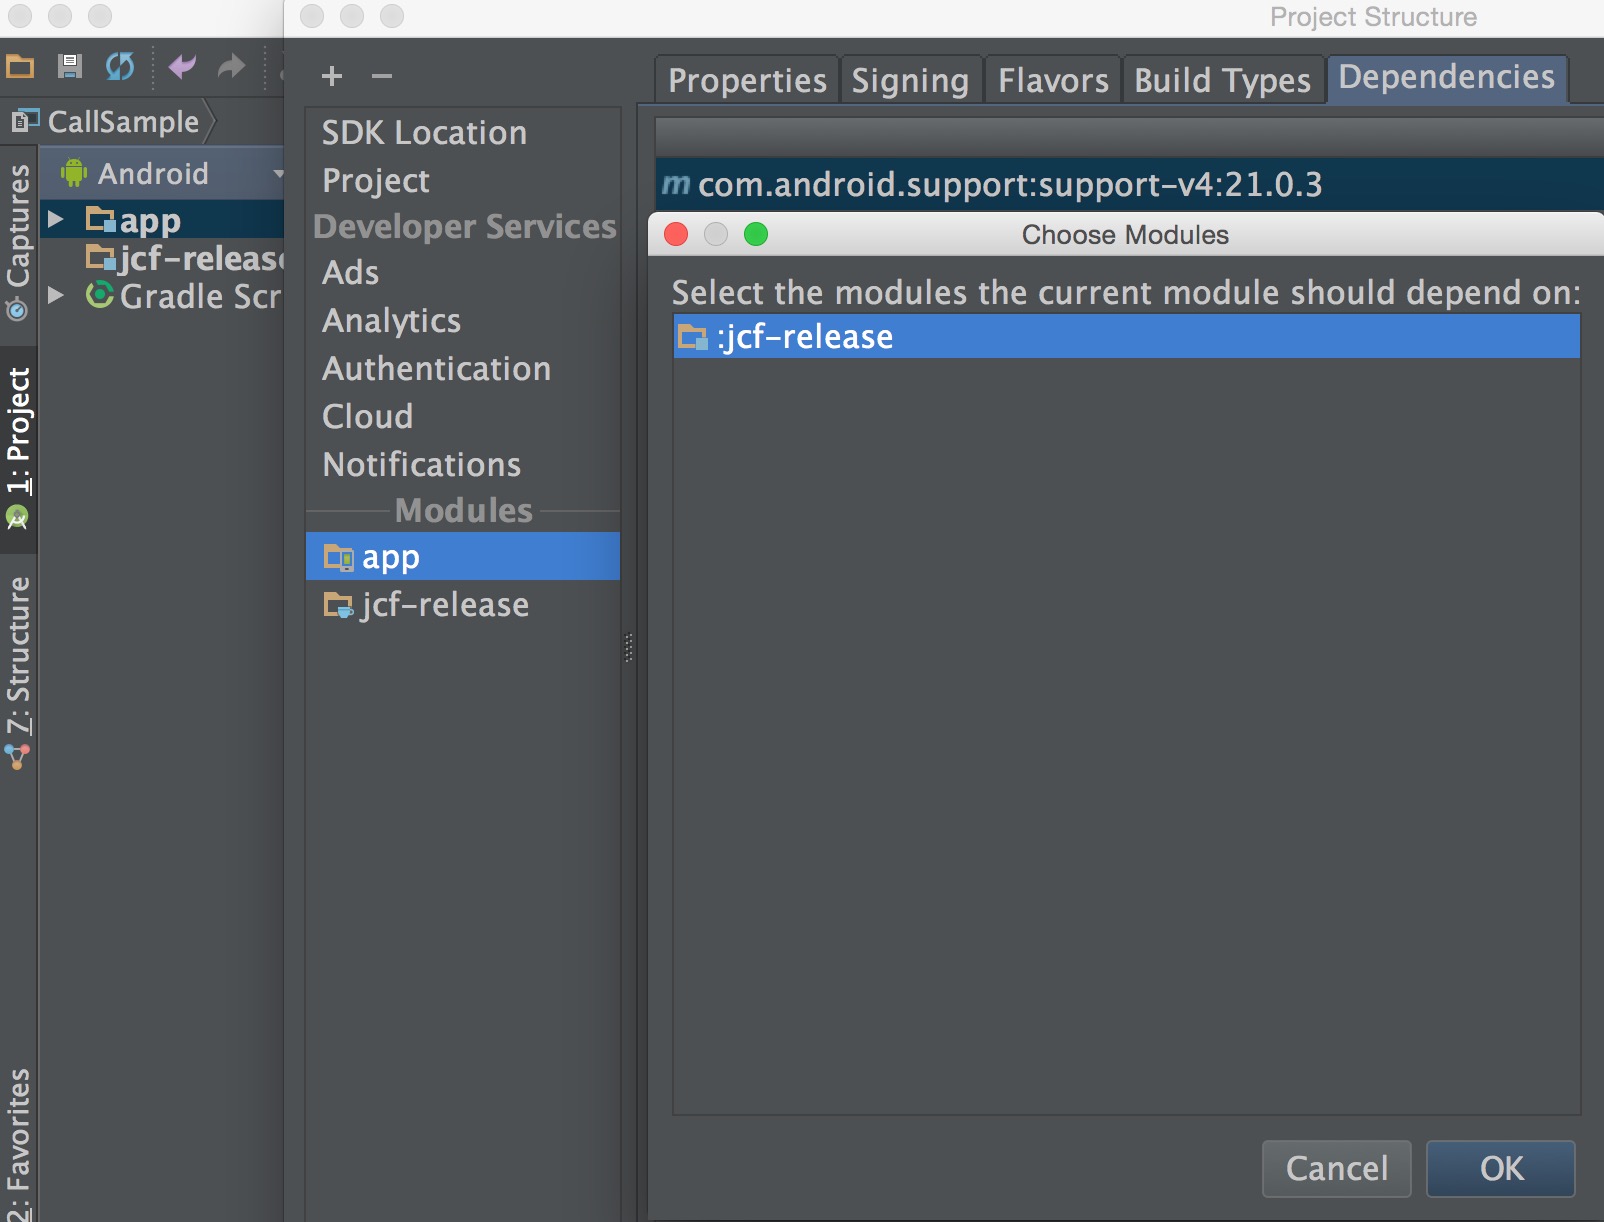 Import Project Dialog